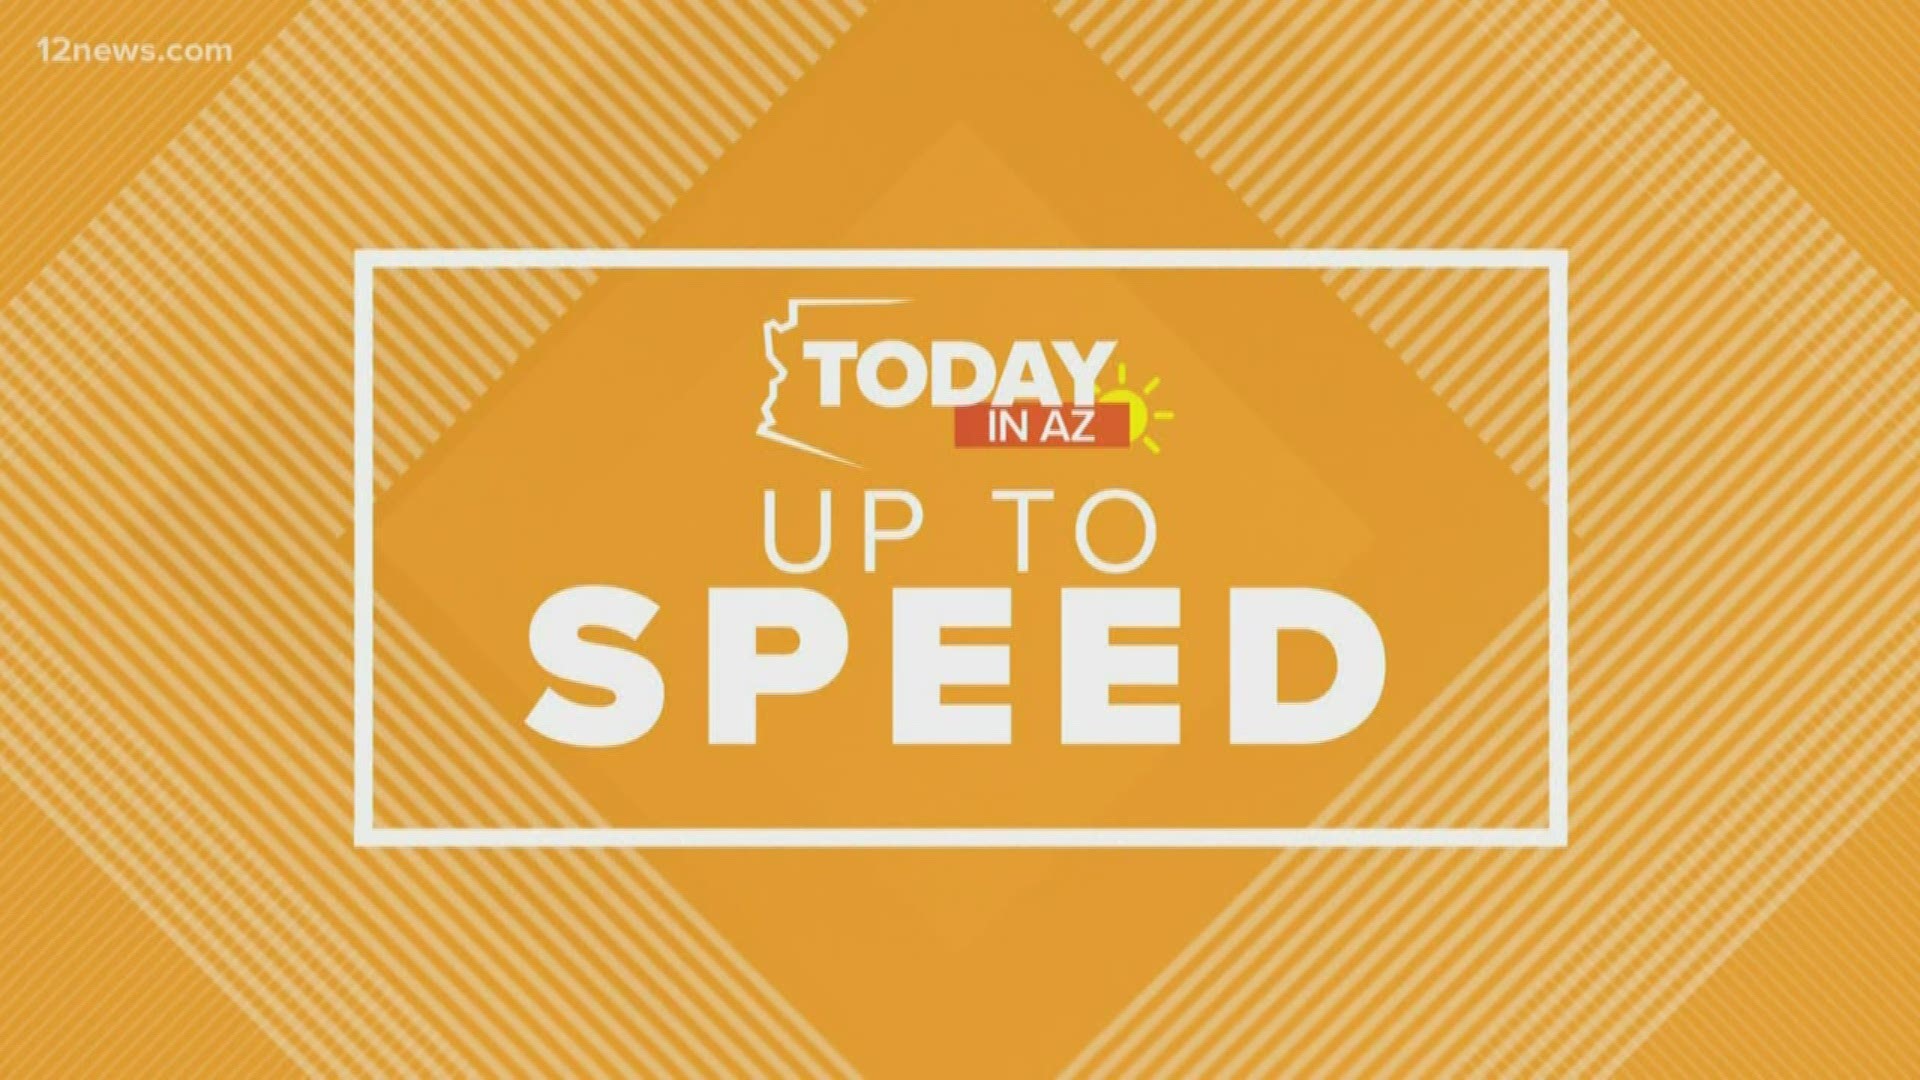 Get "Up to Speed" on the latest news happening around the Valley and across Arizona on Wednesday morning.